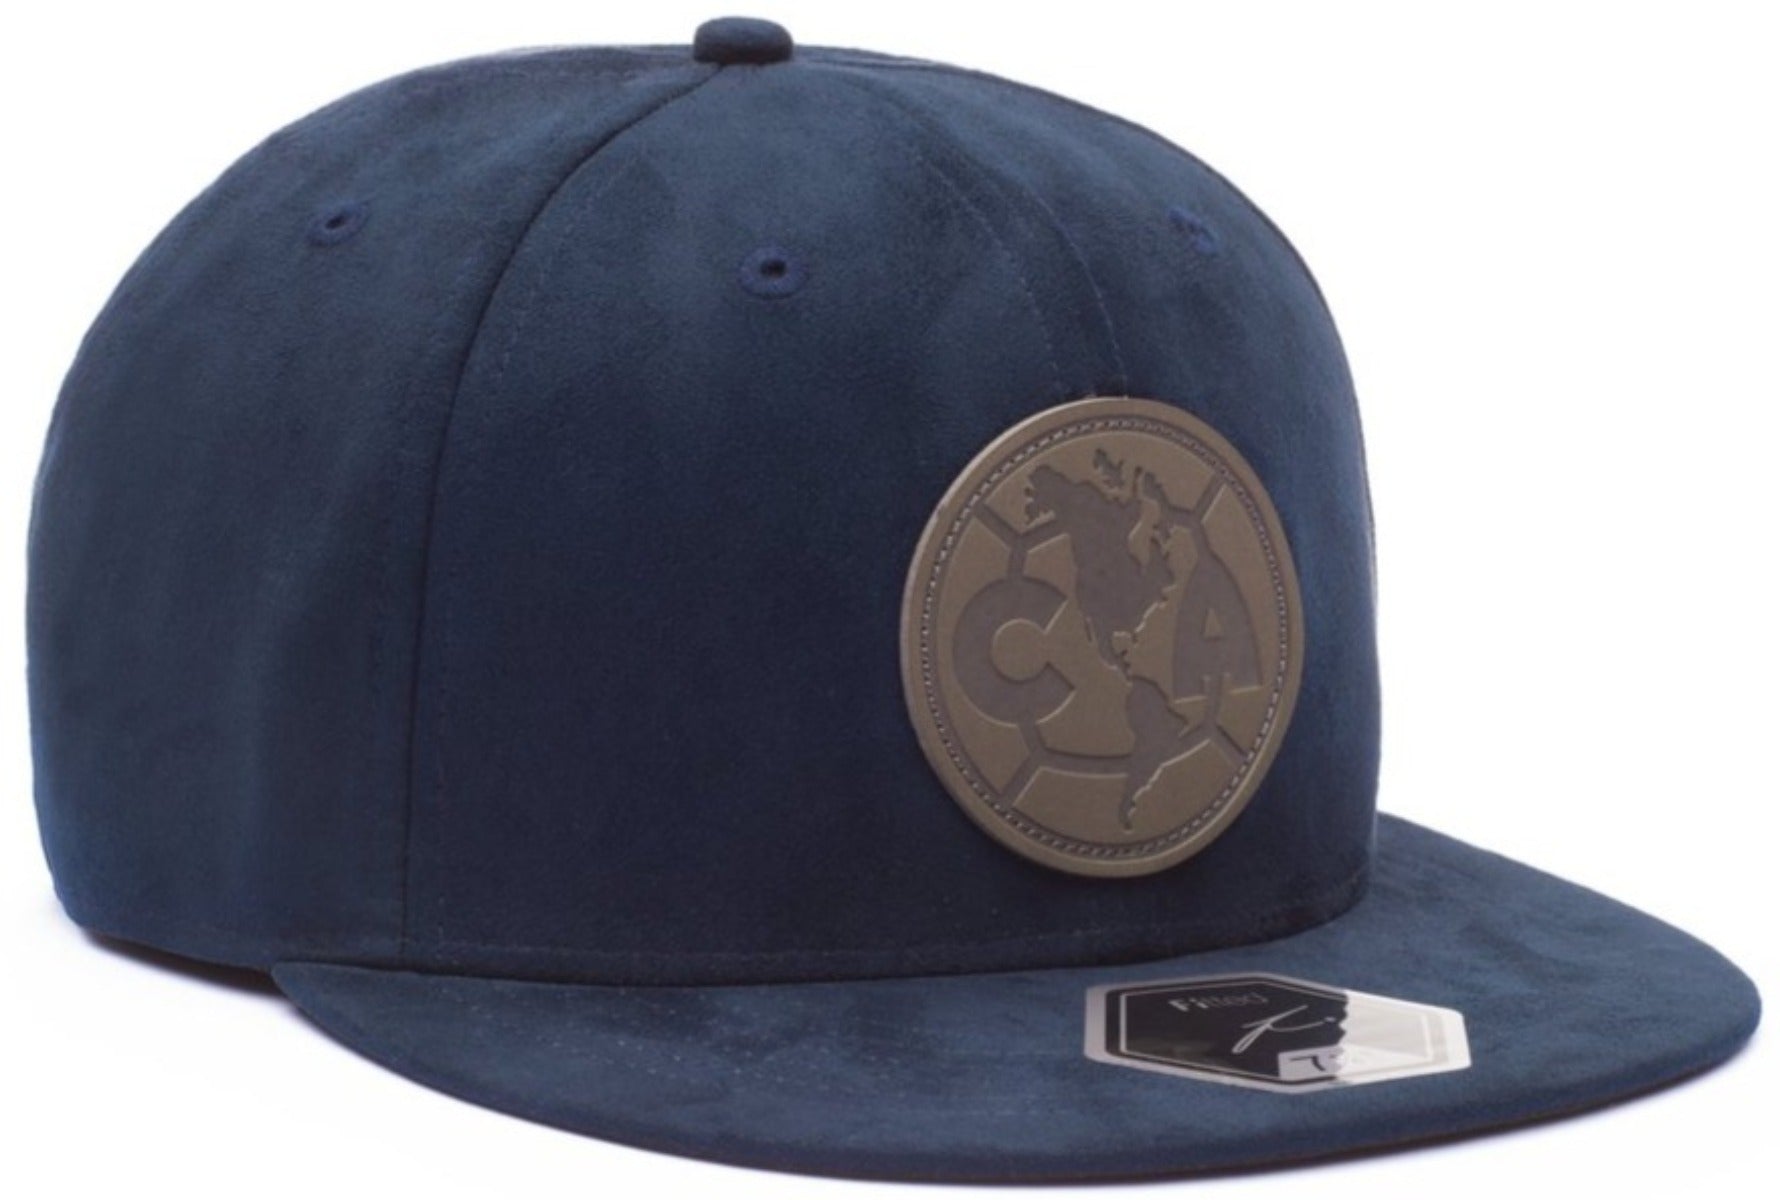 FI COLLECTION CLUB AMERICA TIFOSO FITTED HAT-NAVY